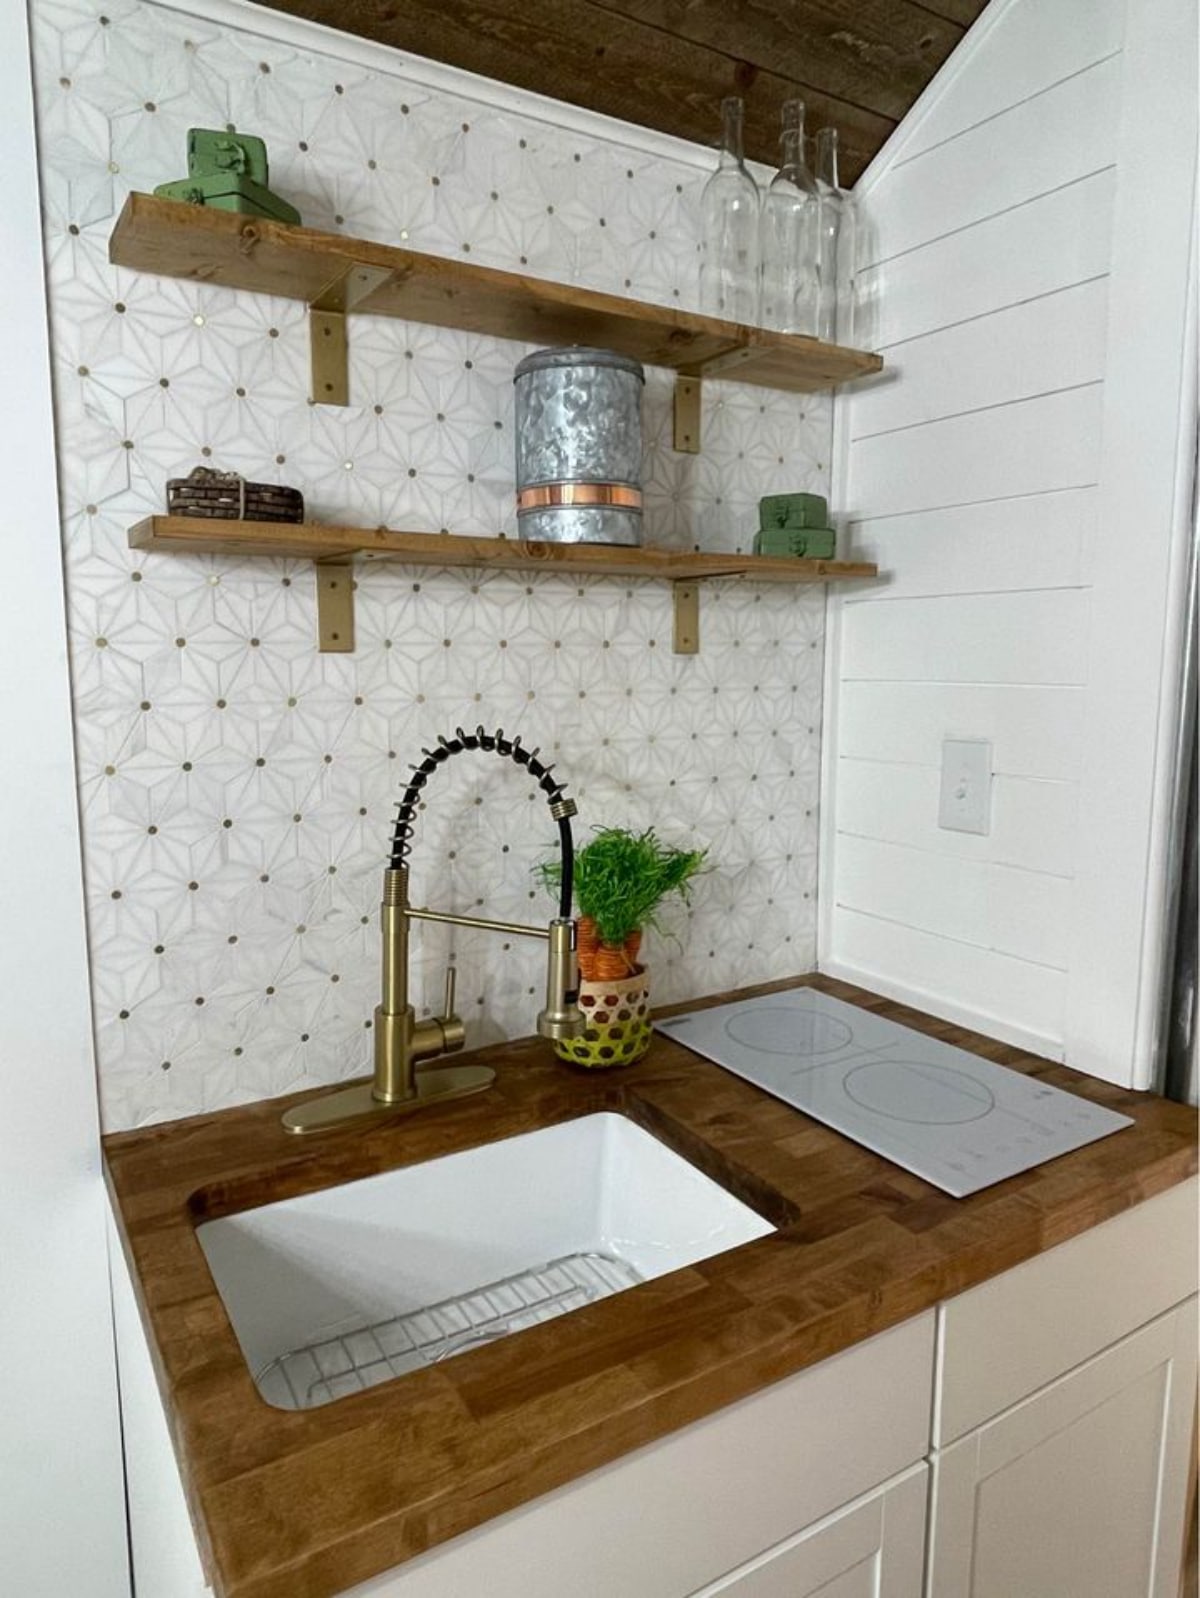 Kitchen area of 16' Compact Tiny House has a sink, a cooktop and some open shelves.